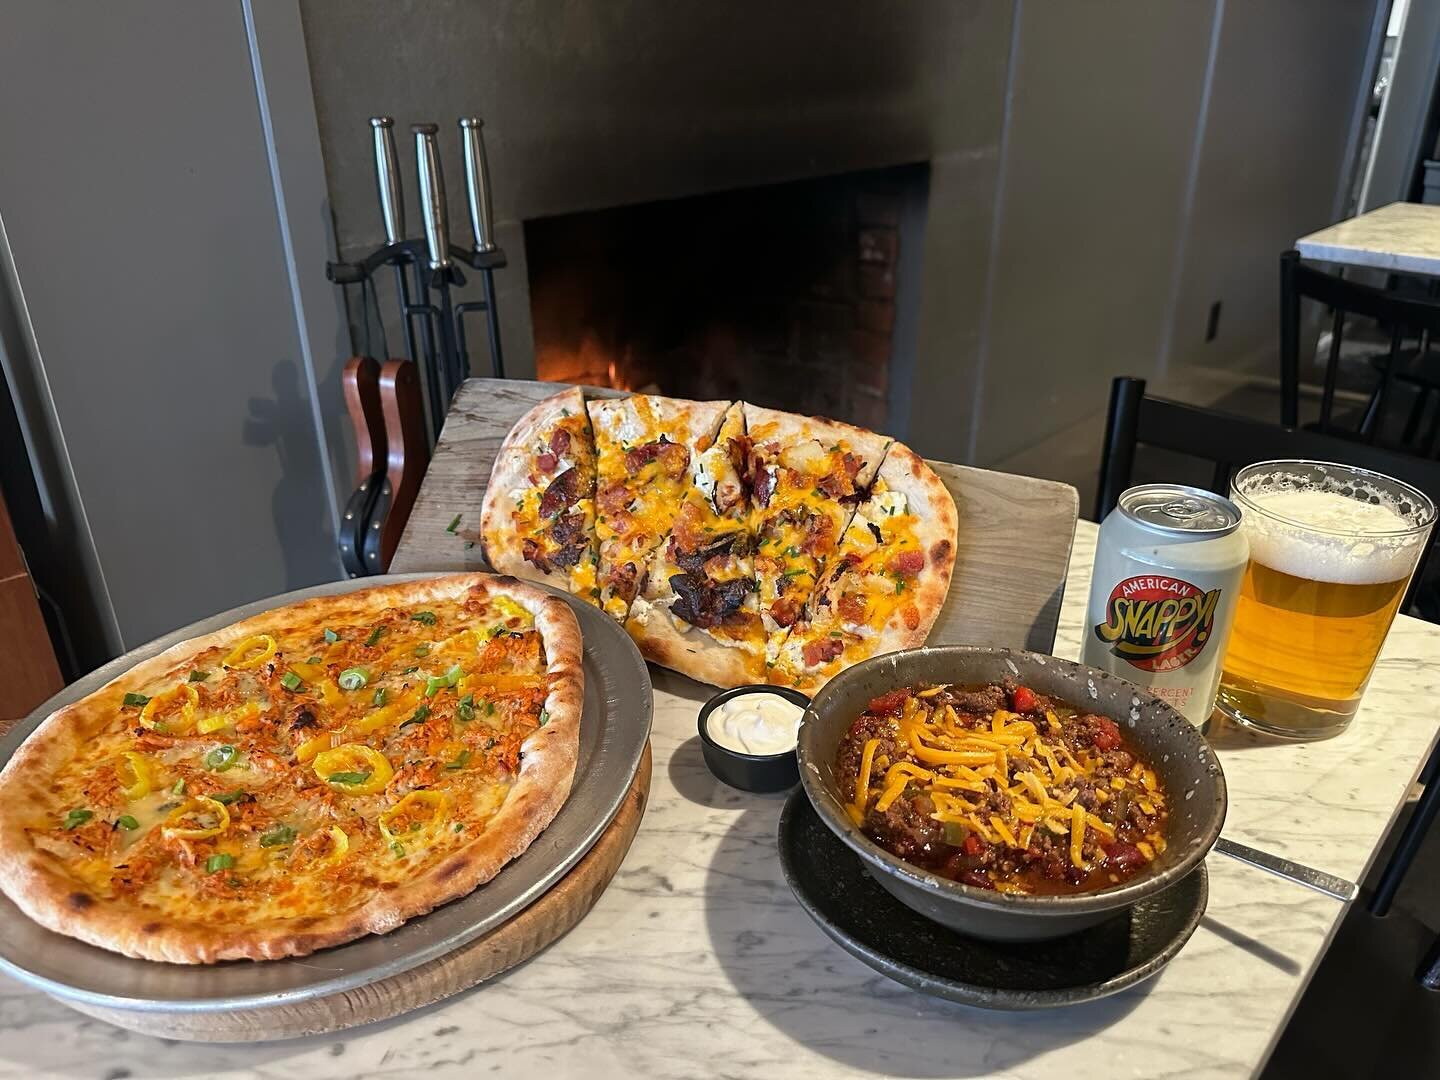 Super Bowl specials are here and at the risk of sounding like a total nerd, they are a TOUCHDOWN! Buffalo Chicken Pizza with T&rsquo;s homemade buffalo sauce. Loaded Baked Potato Flatbread. Best Damn Chili. Call in and order or order online https://o